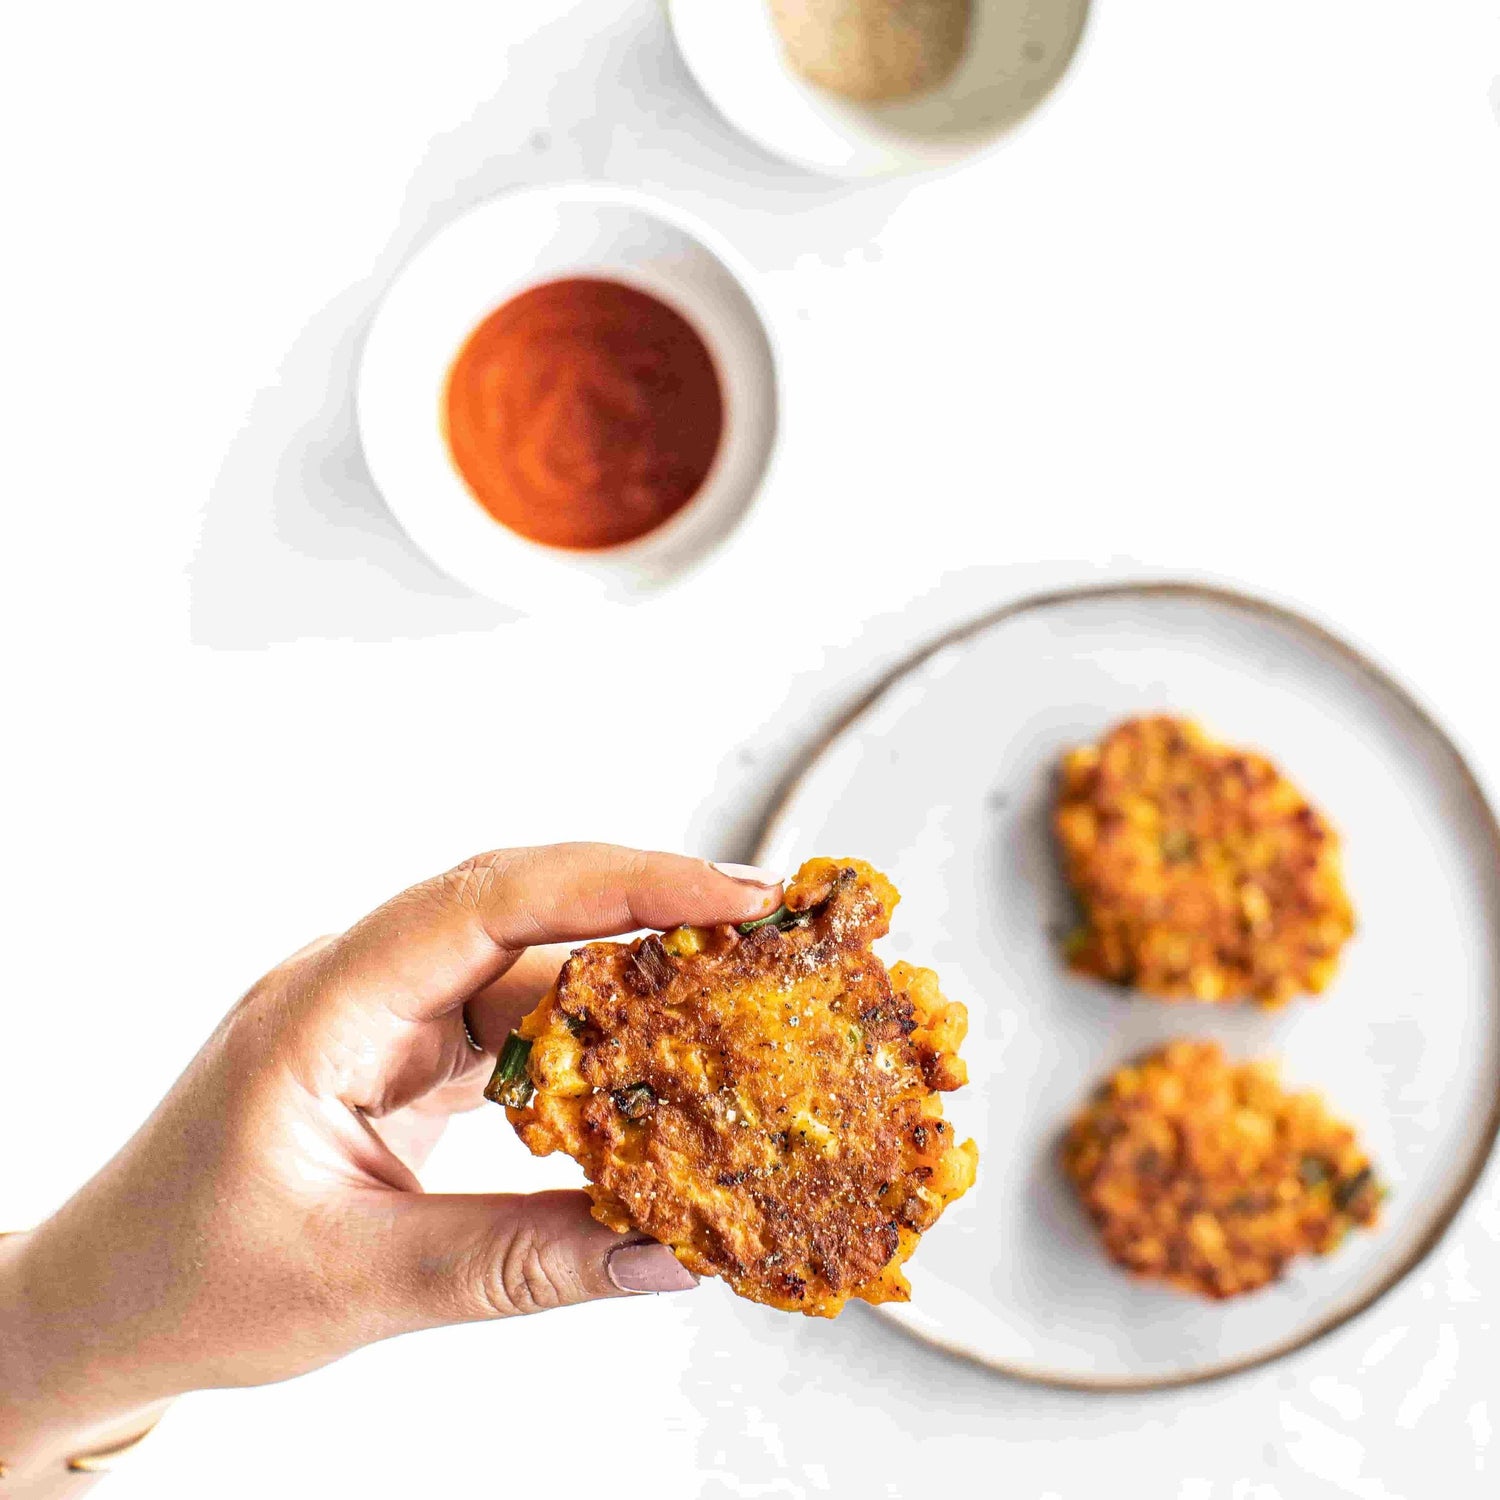 Thai Sweet Potato and Corn Fritters Recipe (conventional recipe)